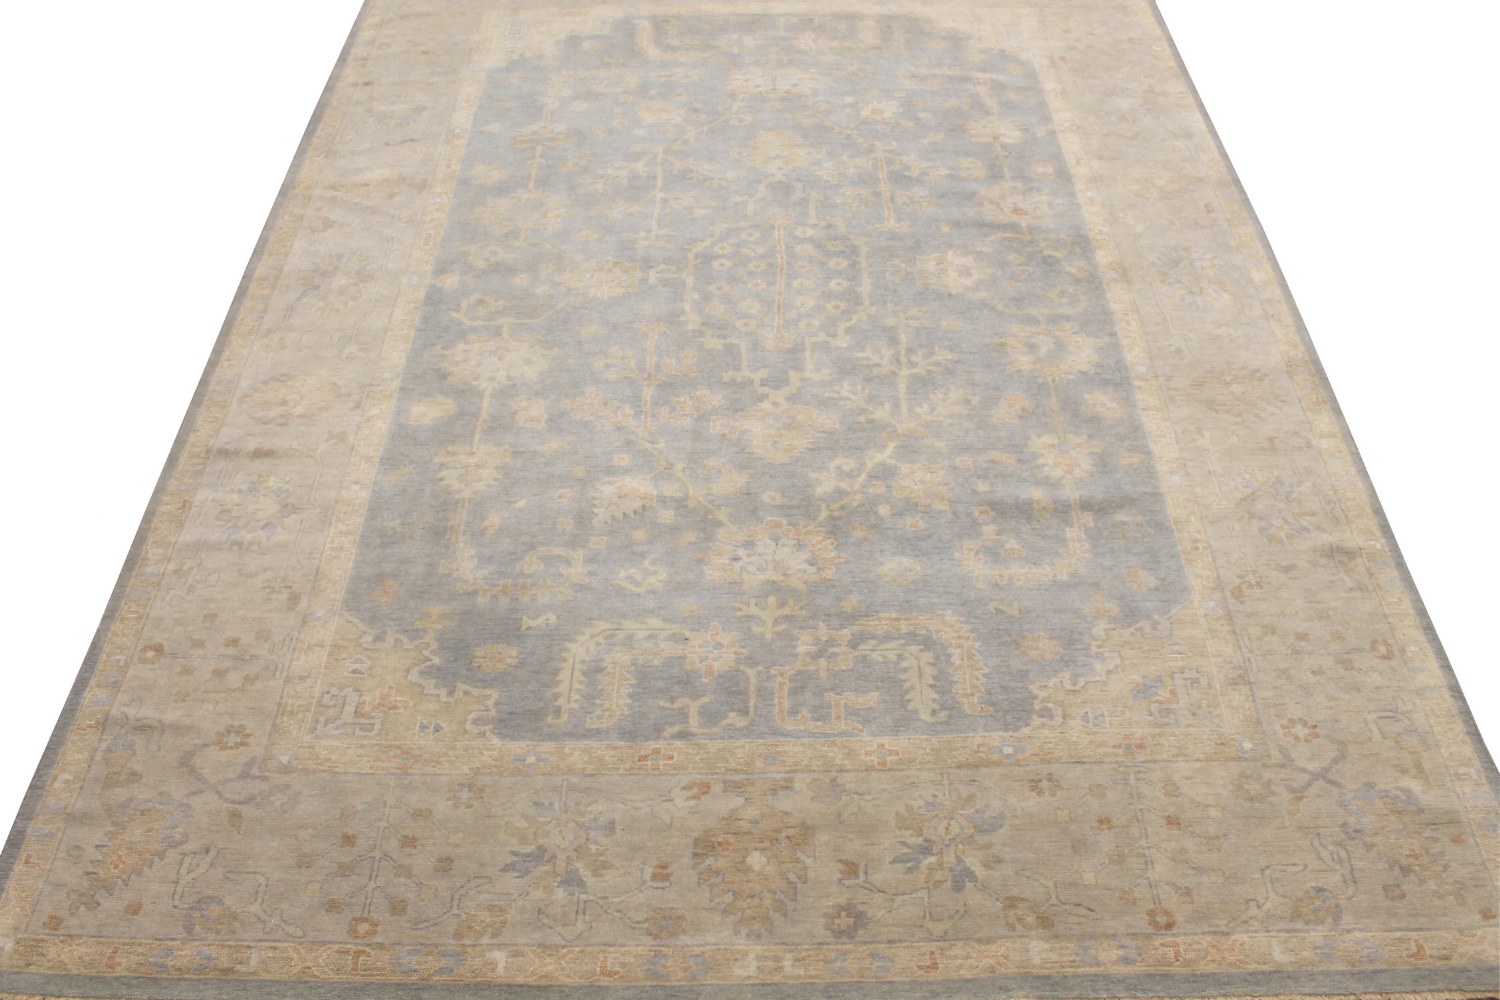 10x14 Aryana & Antique Revivals Hand Knotted Wool Area Rug - MR028525